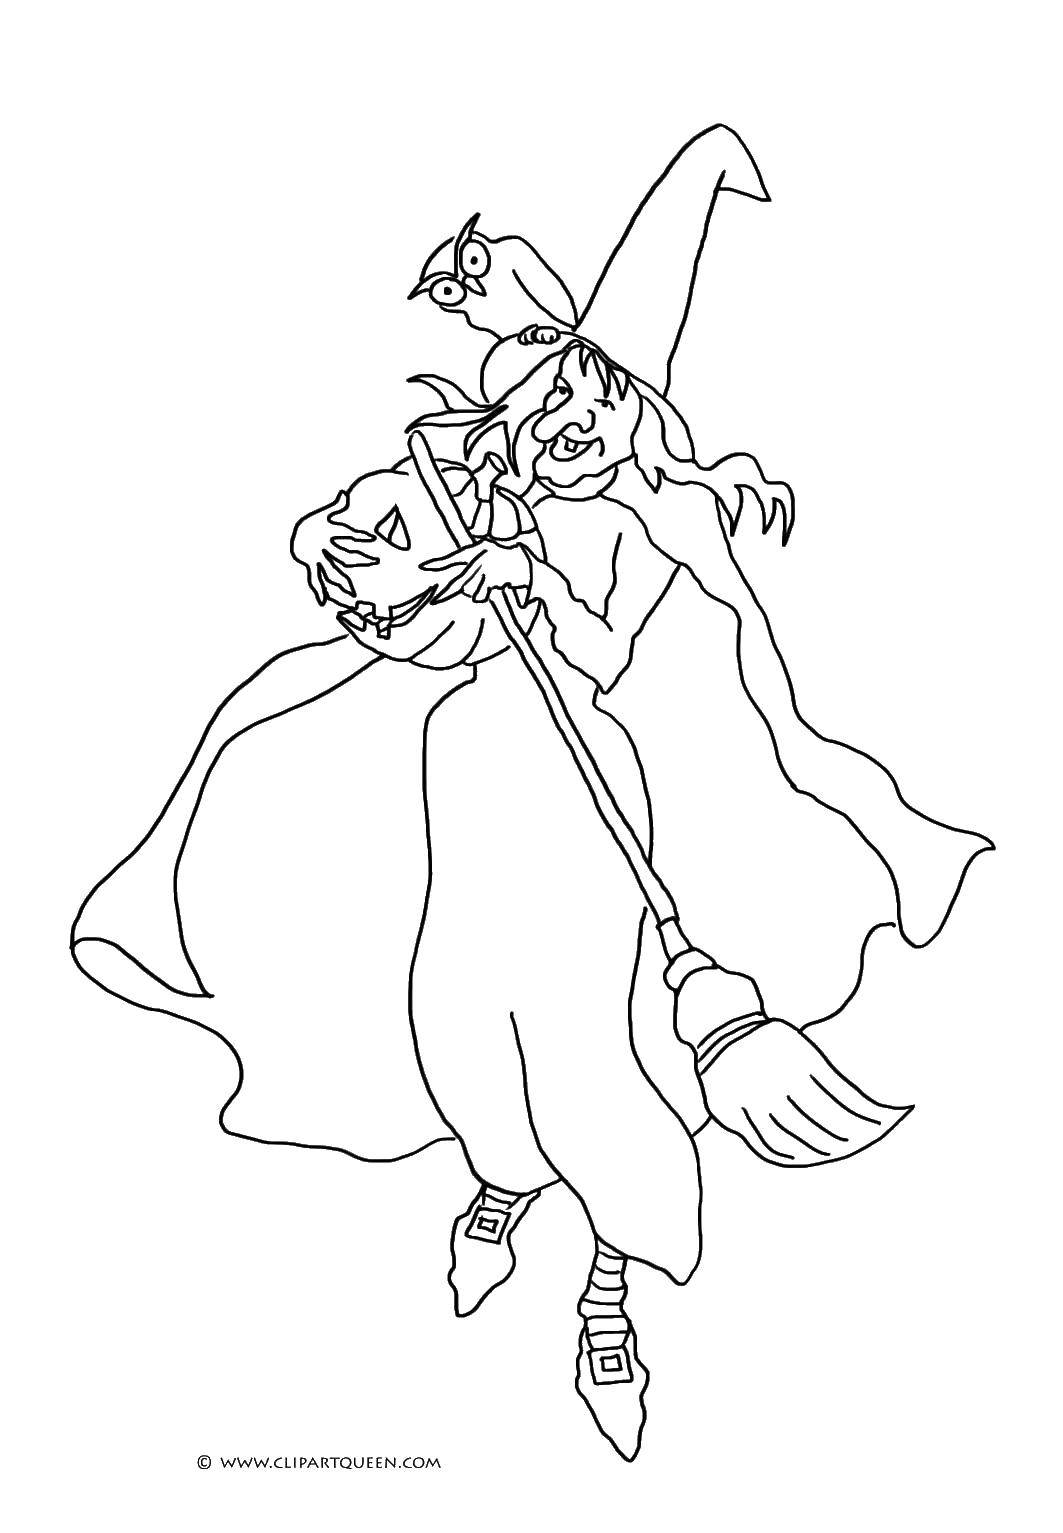 Coloring Witch with broom. Category witch. Tags:  that old woman, witch, broom.